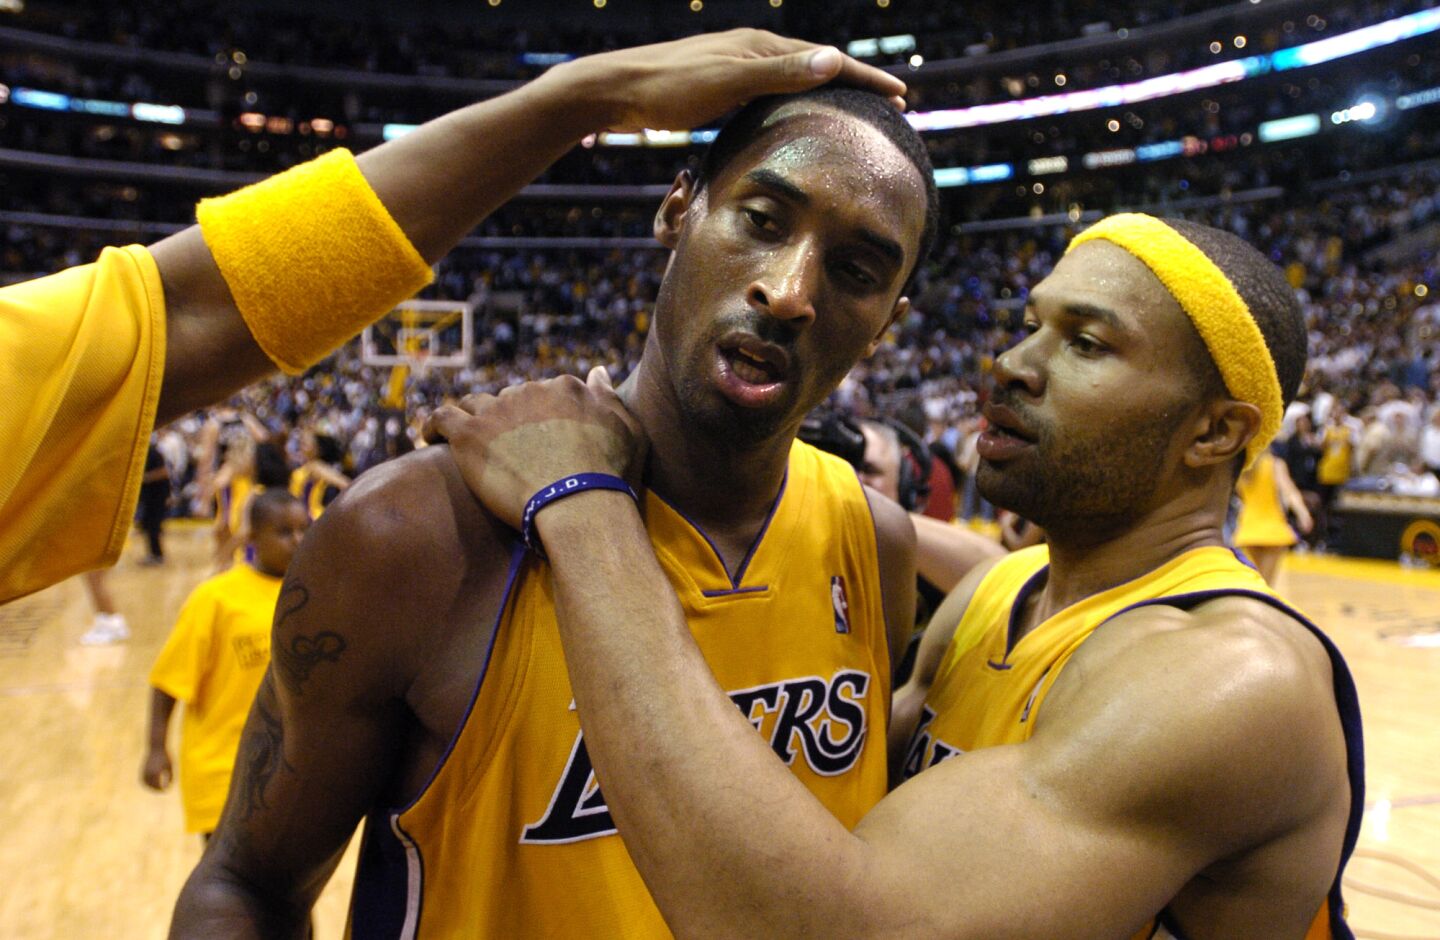 Derek Fisher puts his arms around Kobe Bryant while another Laker's hand can be seen atop Bryant's head.